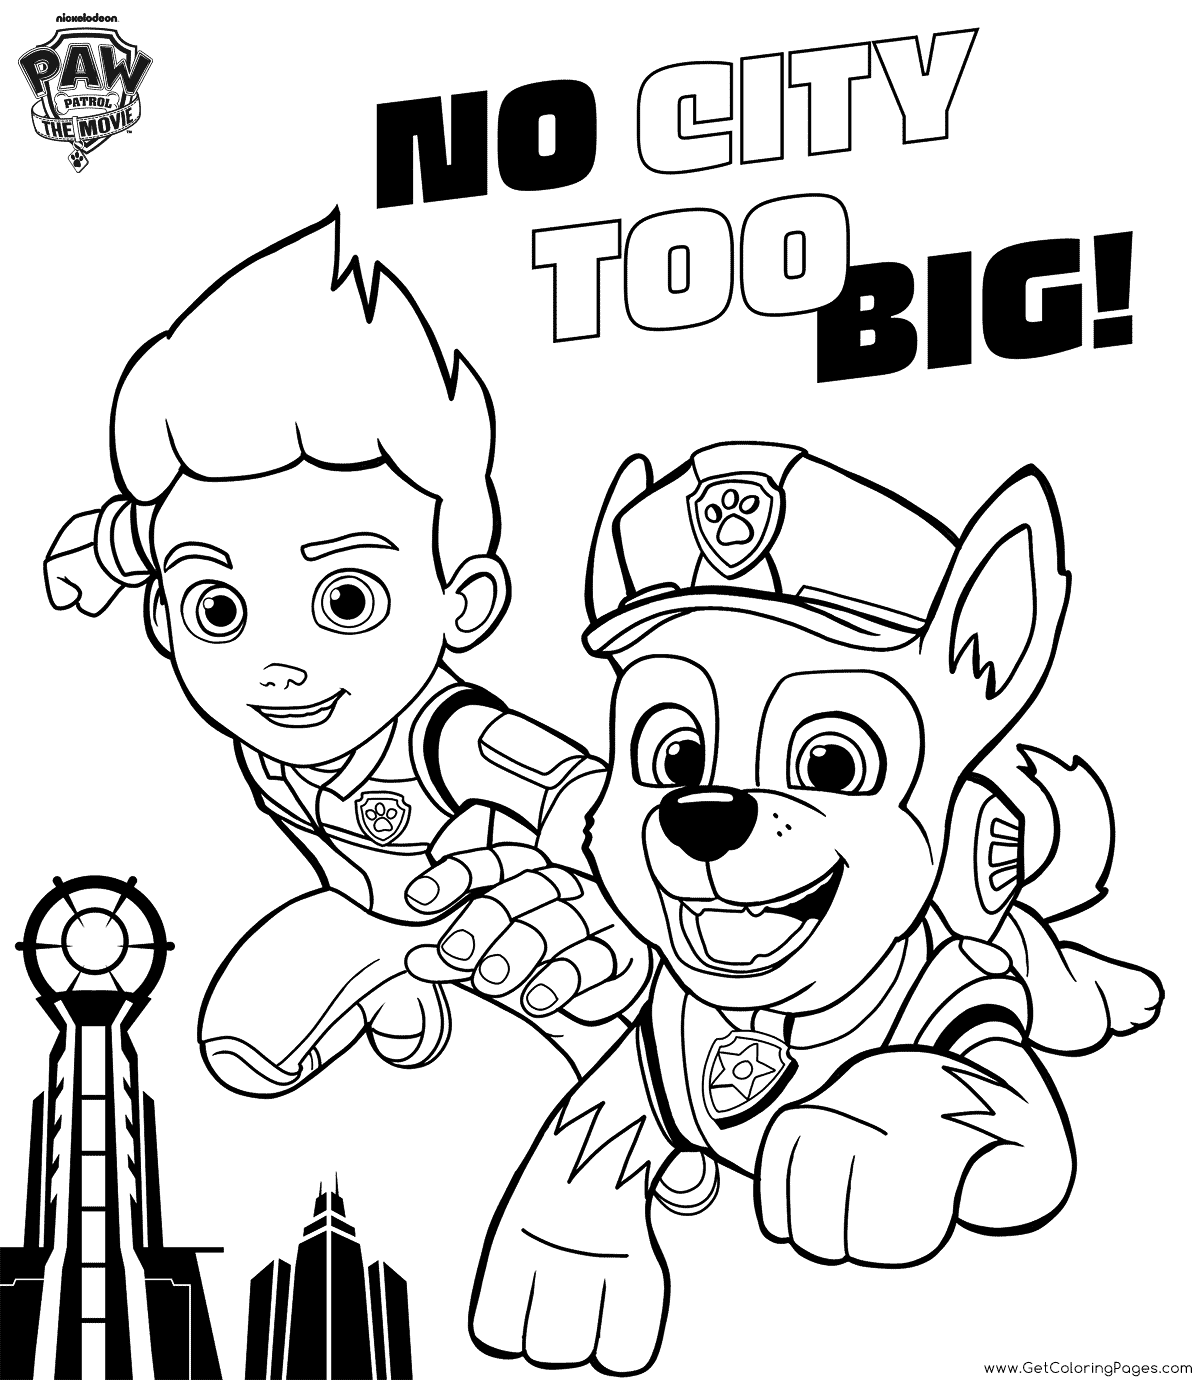 PAW Patrol The Movie Coloring Pages ...